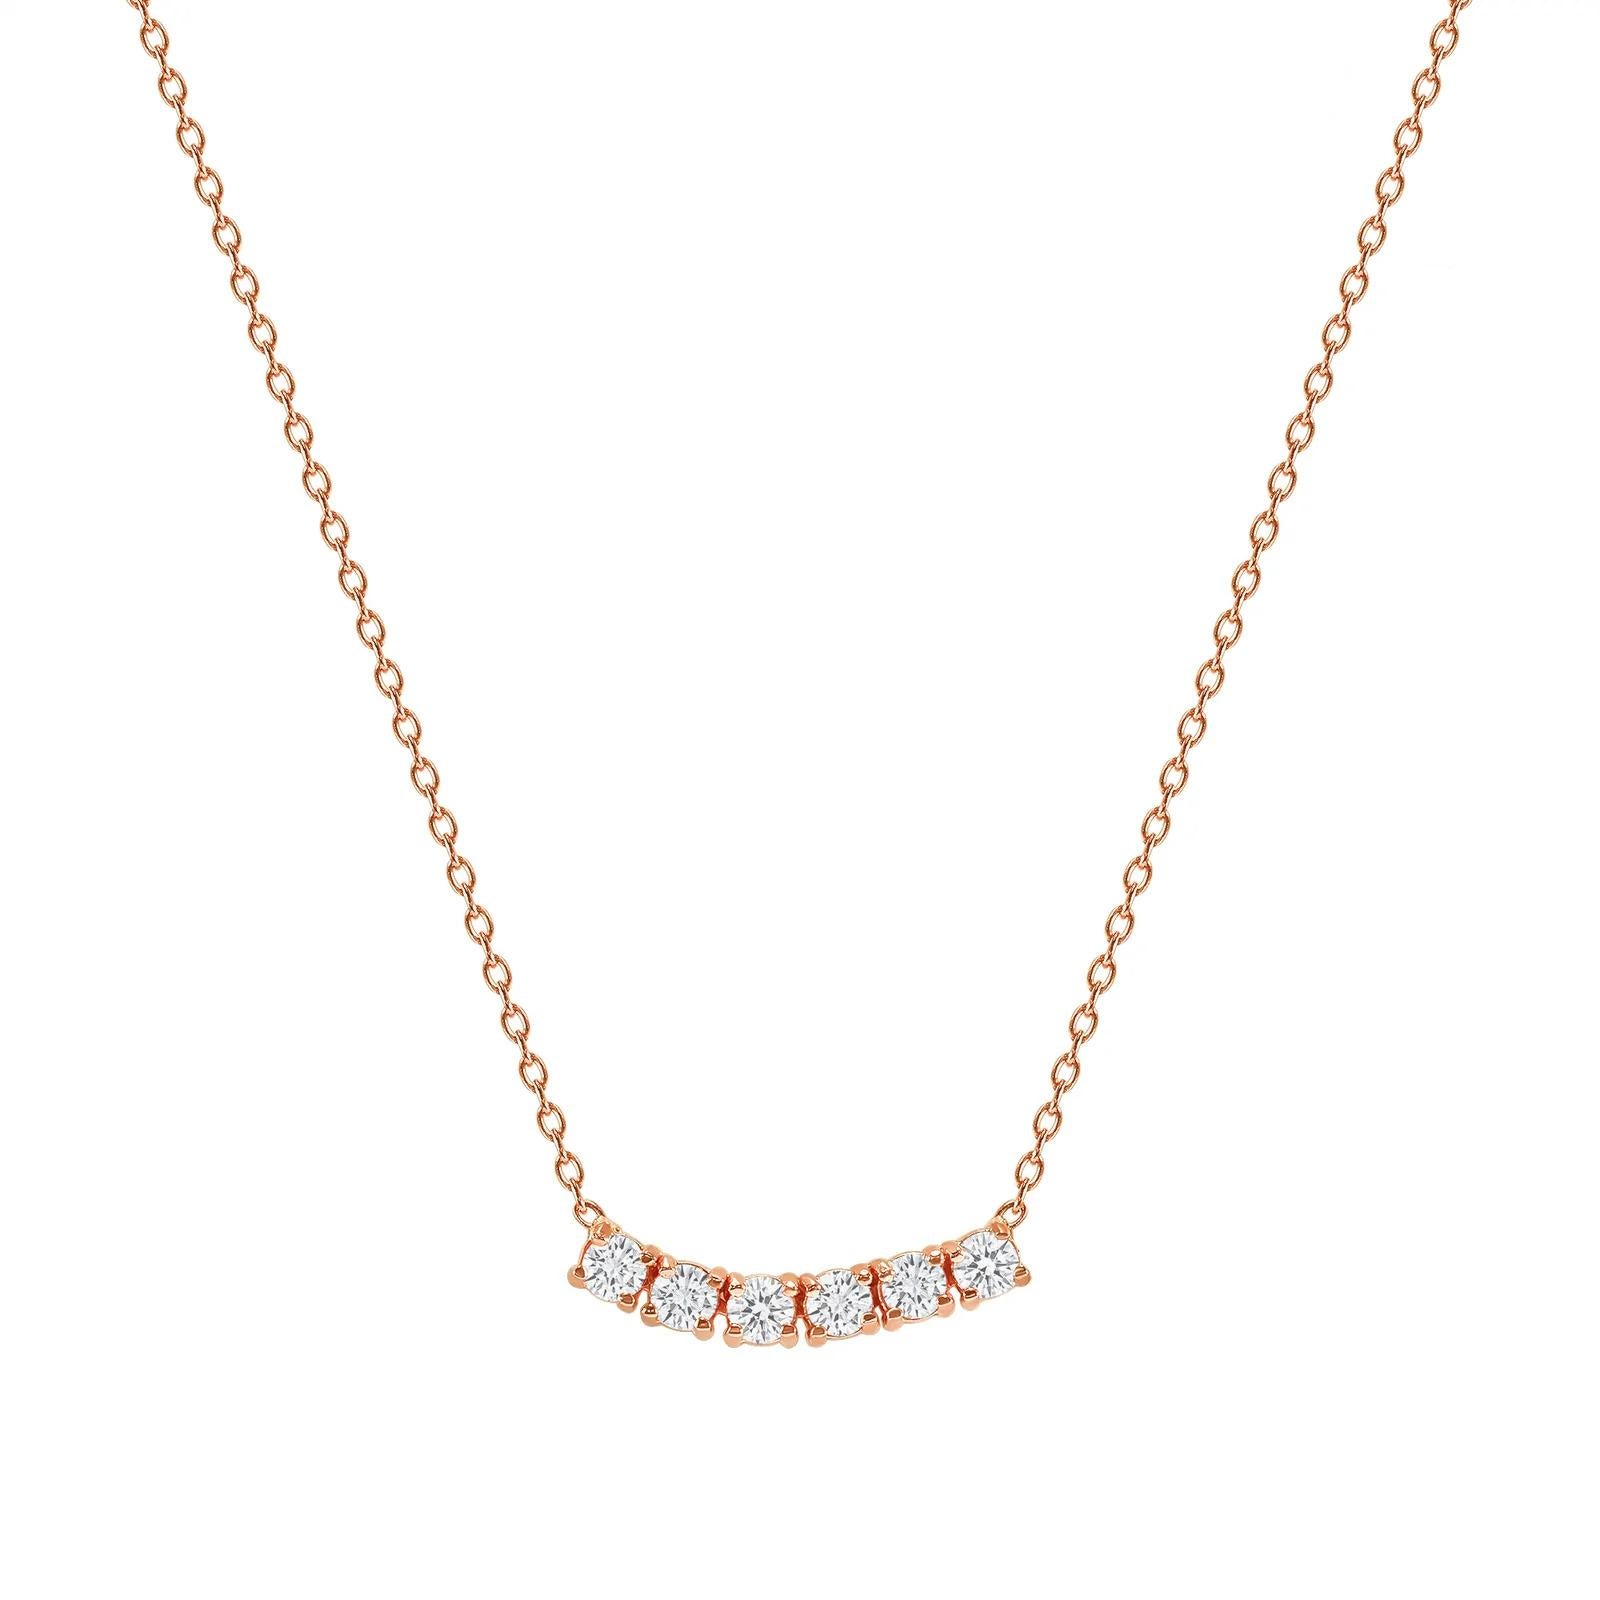 This petite, curved diamond necklace is crafted with gorgeous 14k gold set with six round diamonds.  

Gold: 14k 
Diamond Total Carats: 0.25 ct
Diamond Cut: Round (6 diamonds)
Diamond Clarity: VS
Diamond Color: F
Color: Rose Gold
Necklace Length: 18